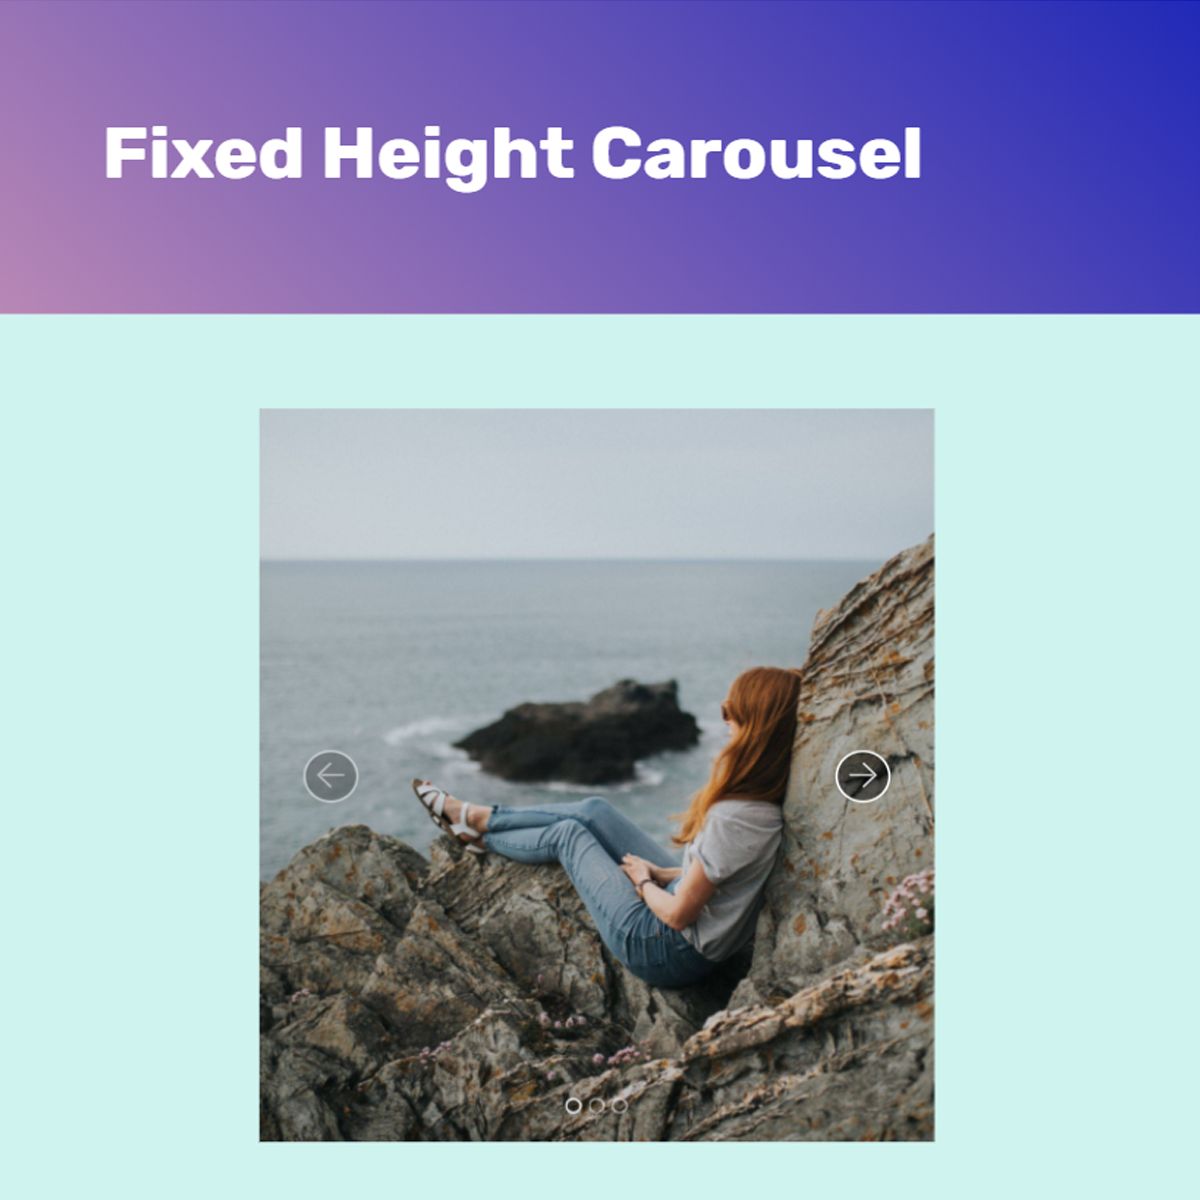 Mobile Bootstrap Image Carousel